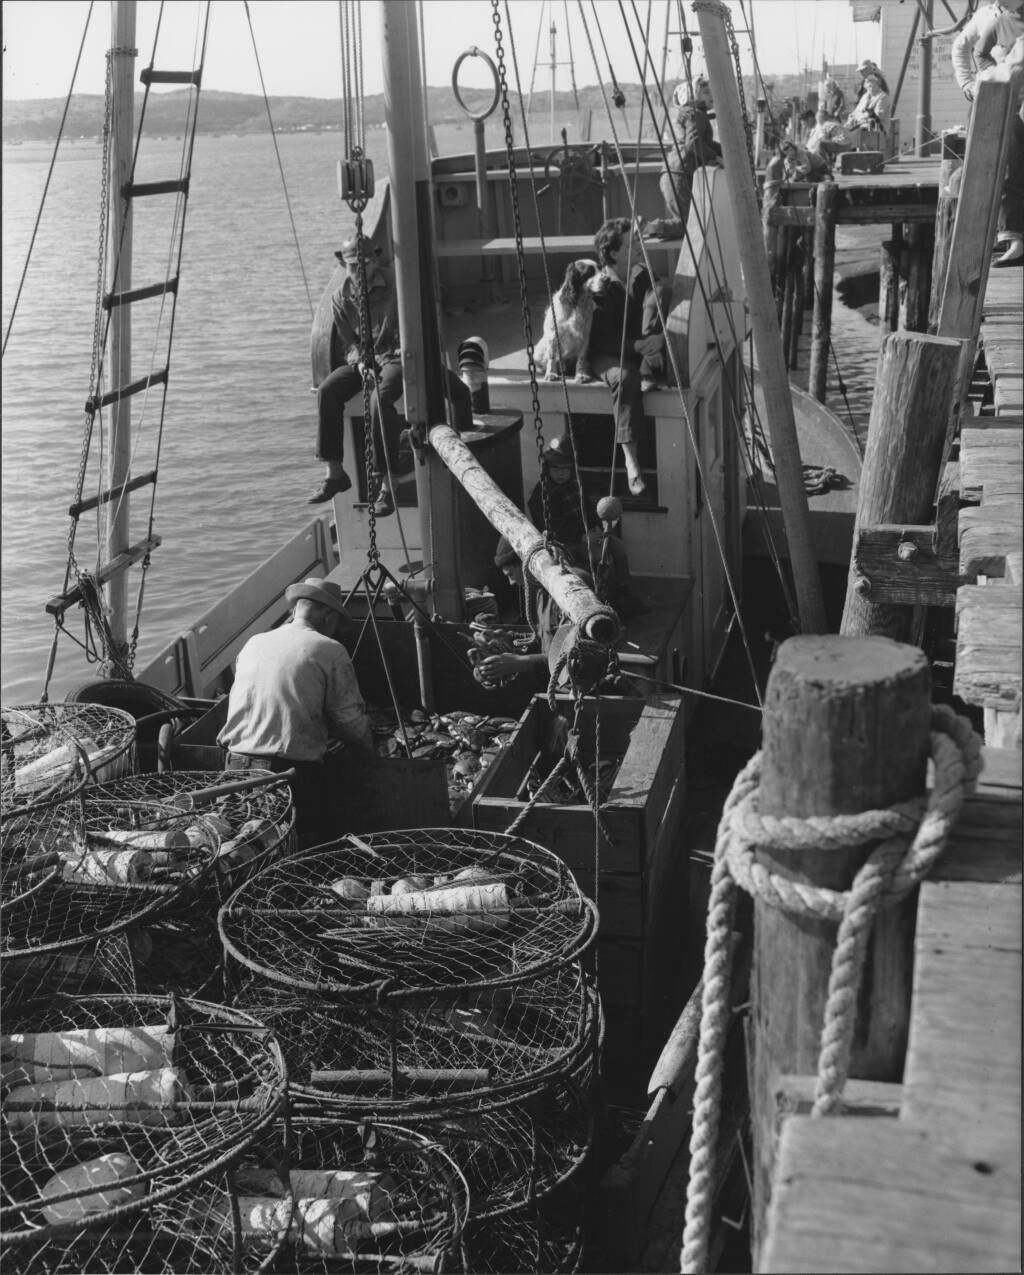 Fishermen at Bodega Bay in 1958 sort through their catch of Dungeness crabs at a pier. The crab industry grew during the 1940s and 1950s out of demand for food production during World War II. (Sonoma County Library)